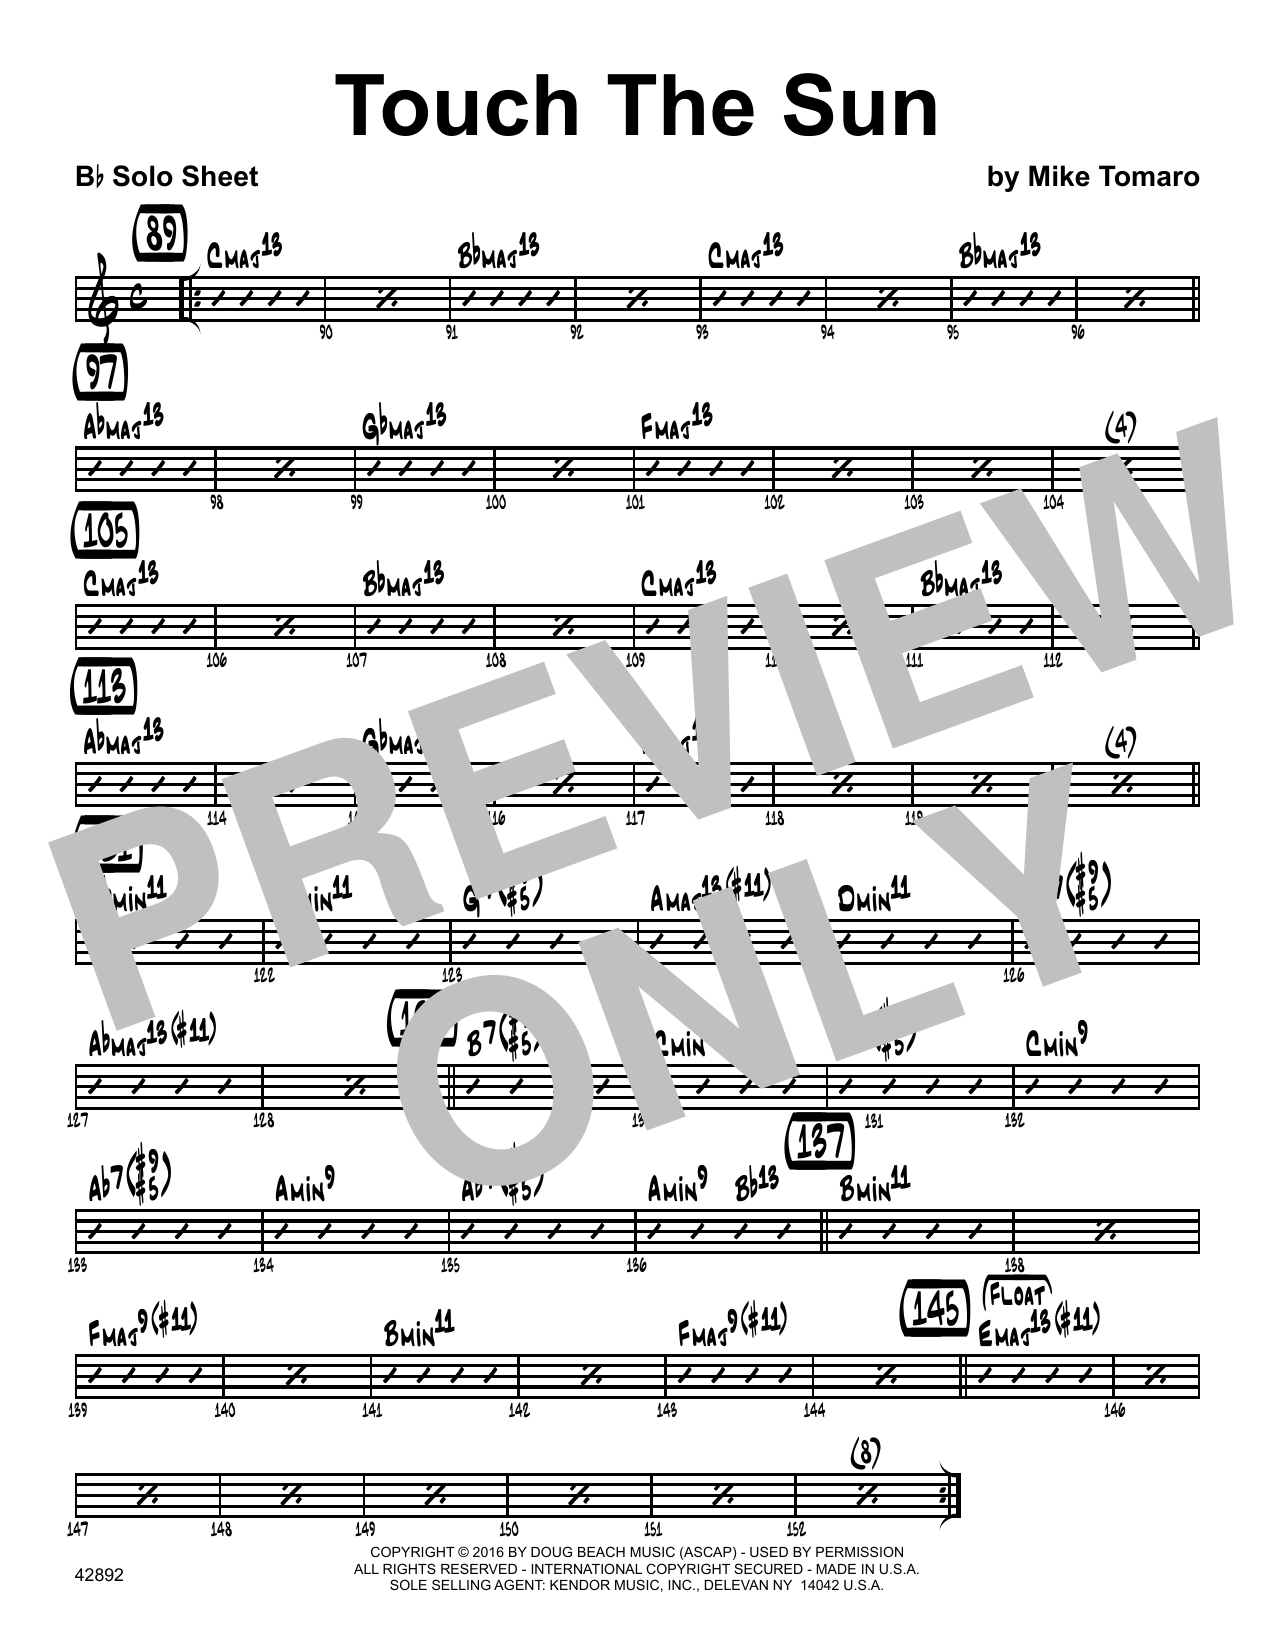 Download Mike Tomaro Touch The Sun - Bb Solo Sheet Sheet Music